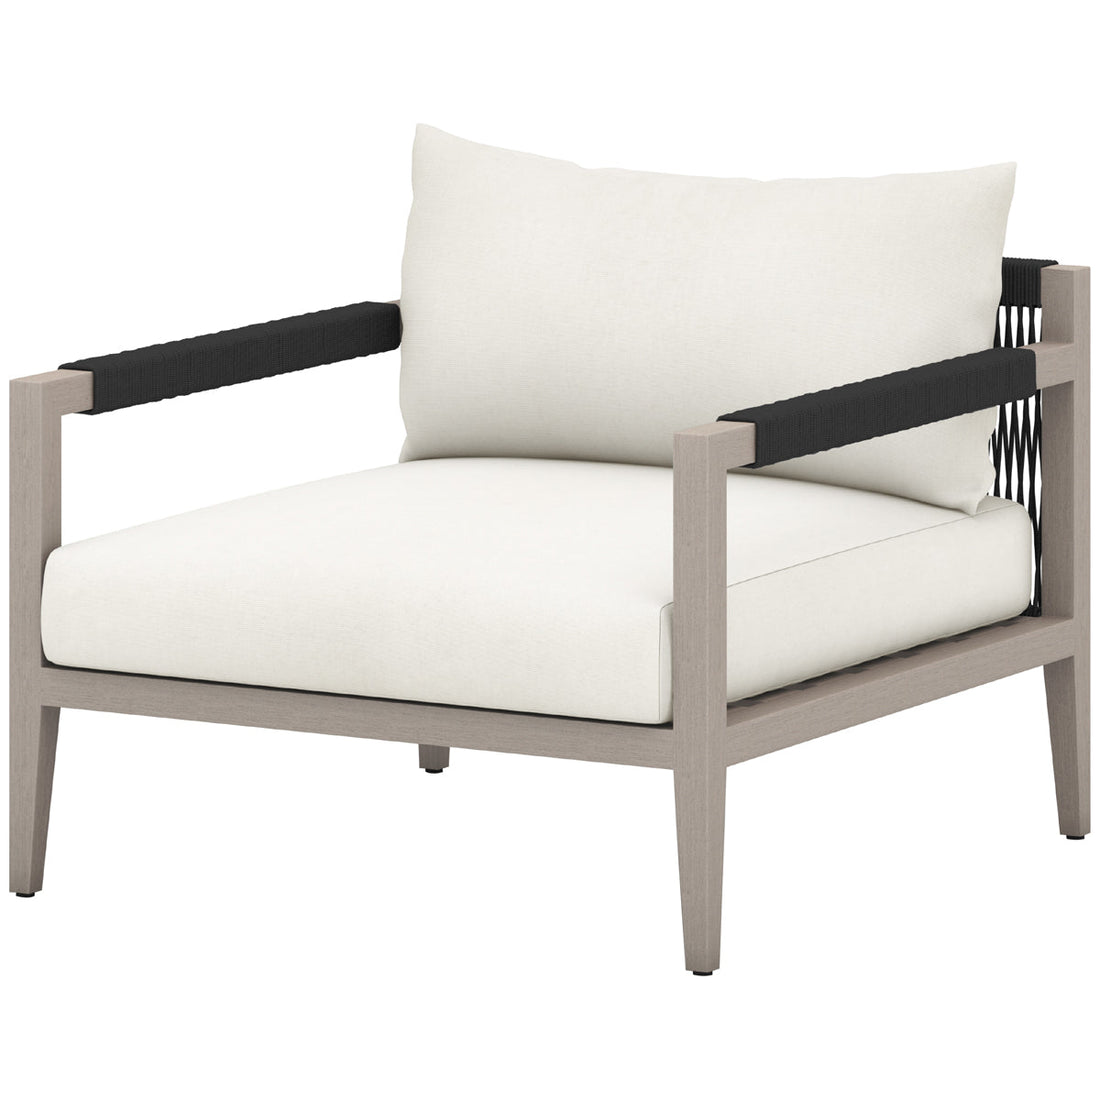 Four Hands Solano Sherwood Outdoor Chair